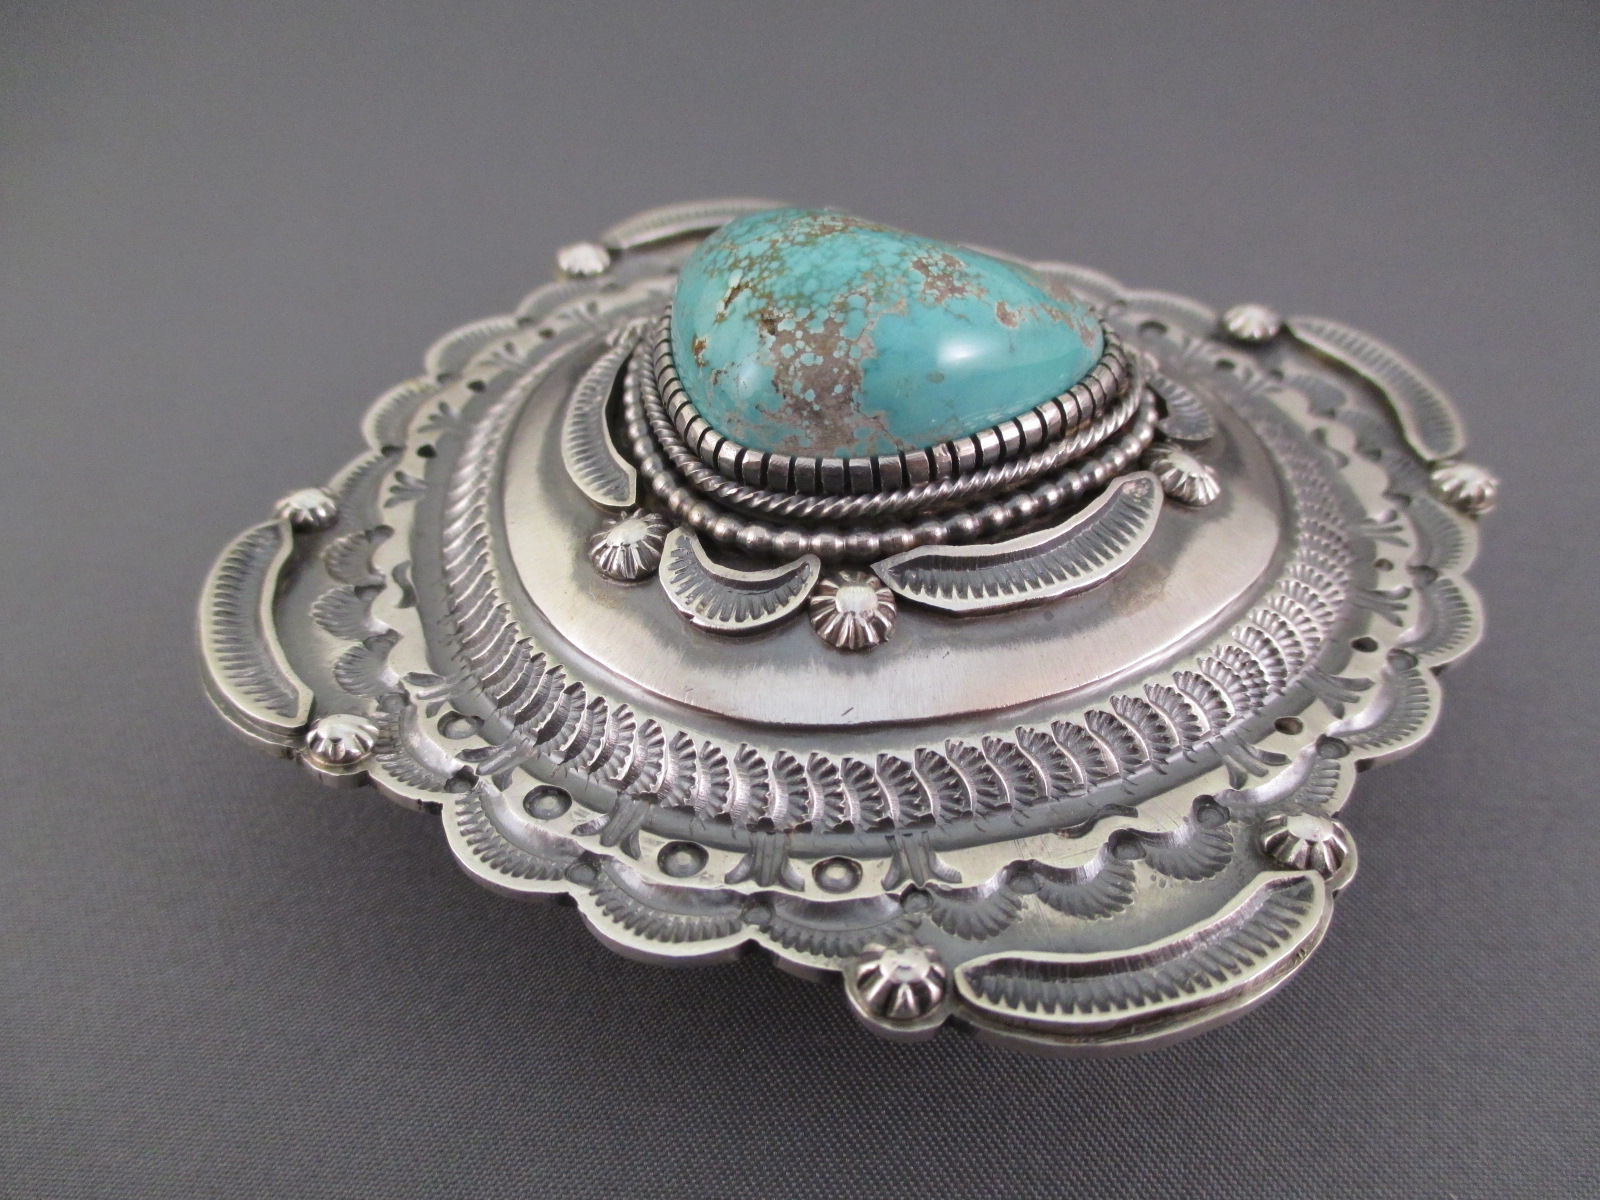 Native American Indian made Belt Buckle of Sterling Silver & Carico Lake Turquoise